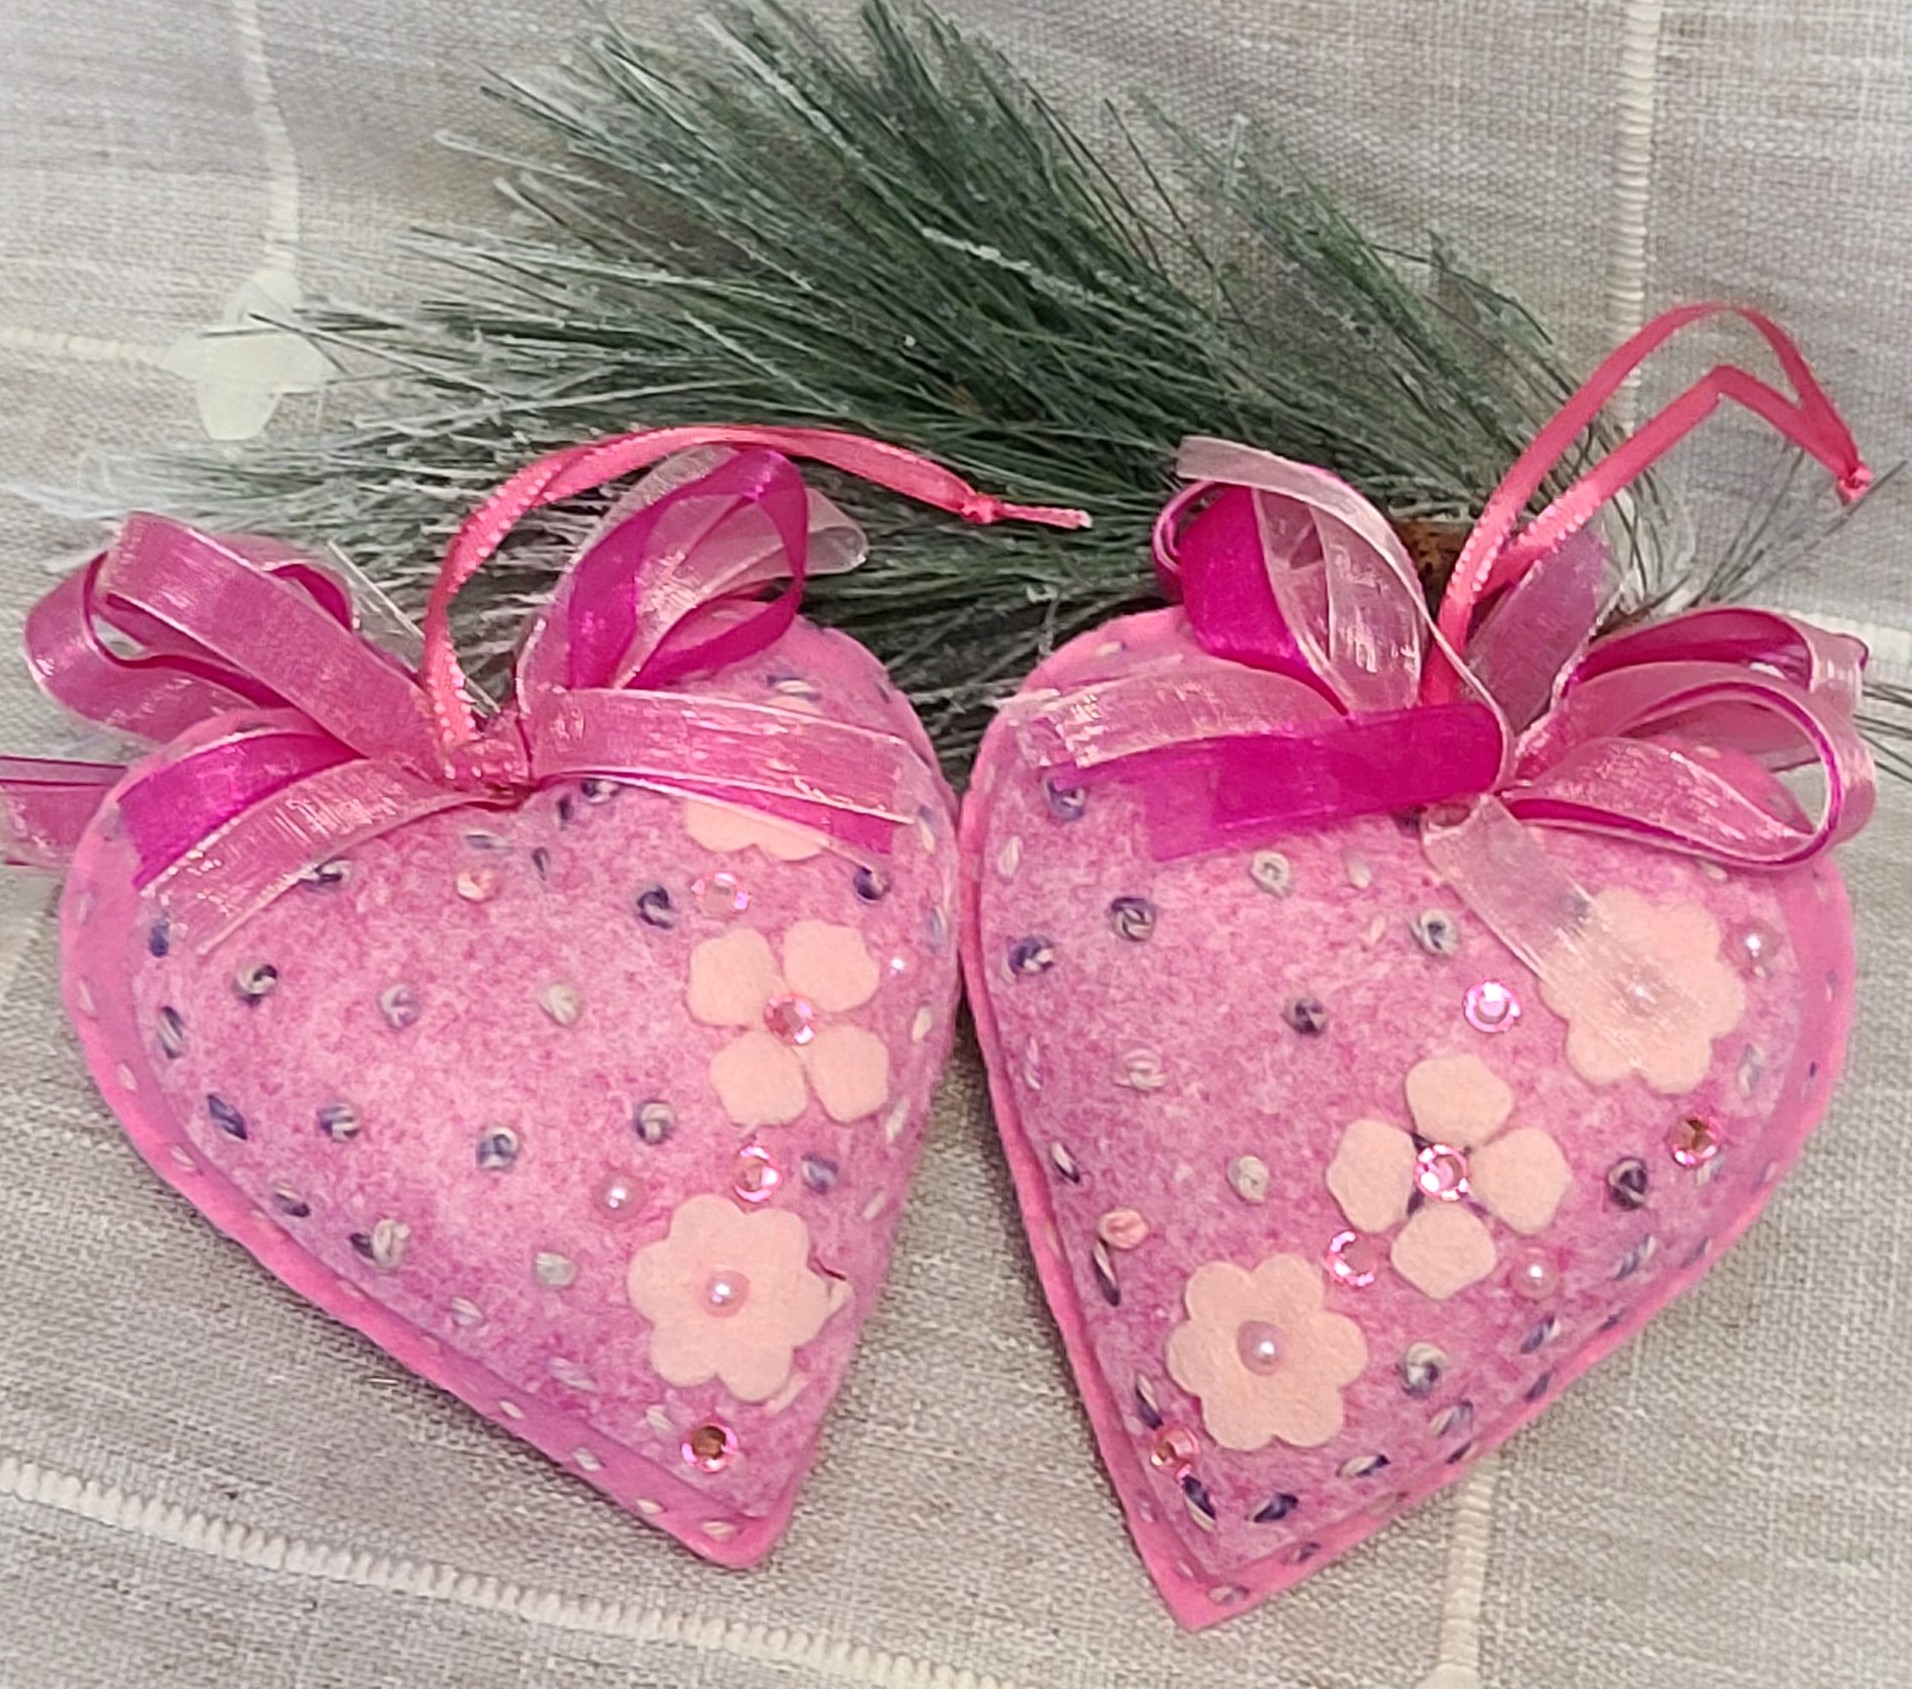 Pink Hearts with flowers and embellishments Spring ornament